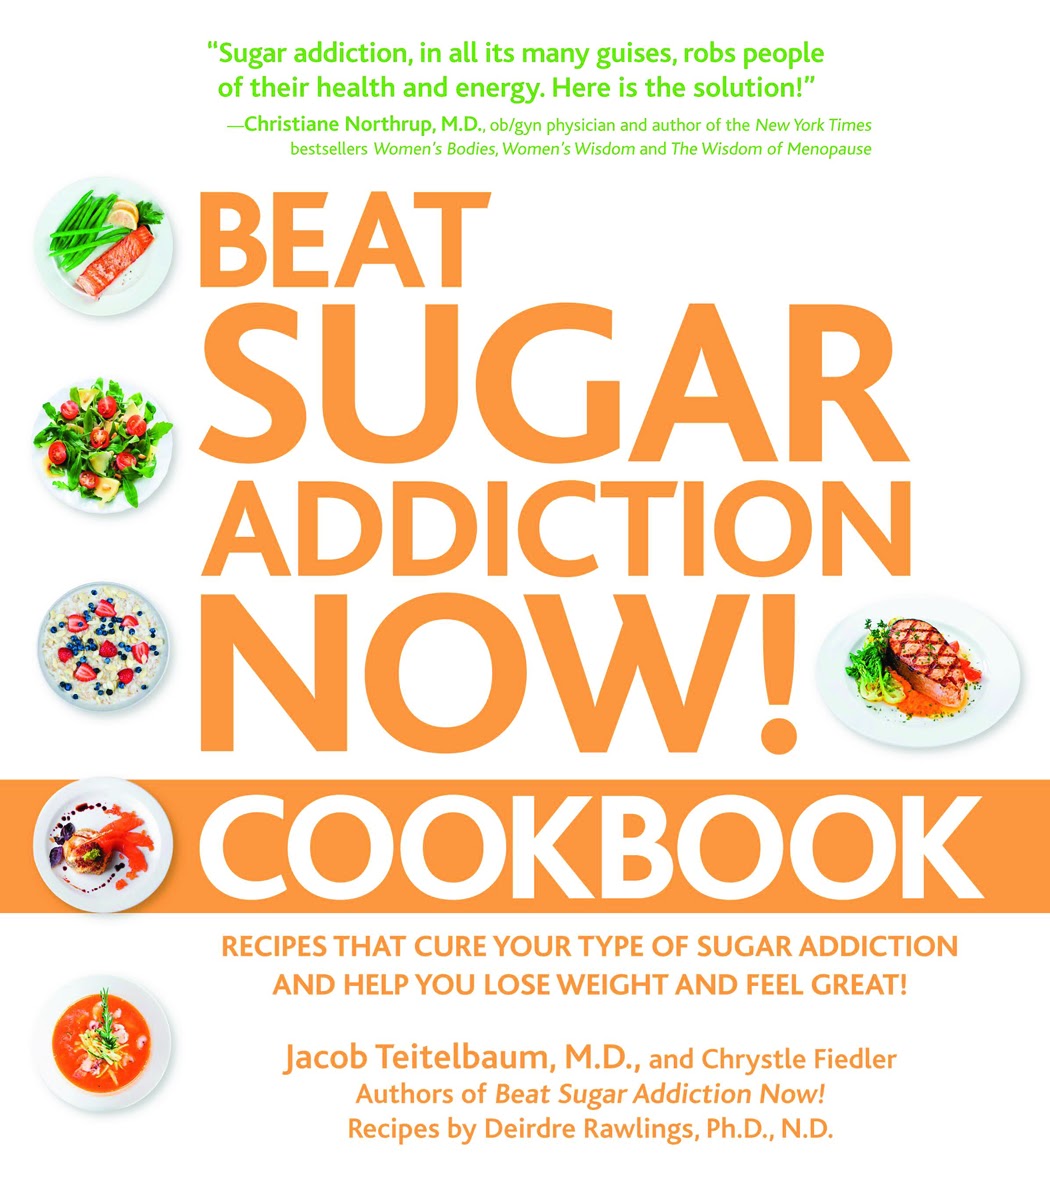 NOW CLOSED: WIN Beat Sugar Addiction Now! Cookbook by Jacob Teitelbaum – Review & Giveaway